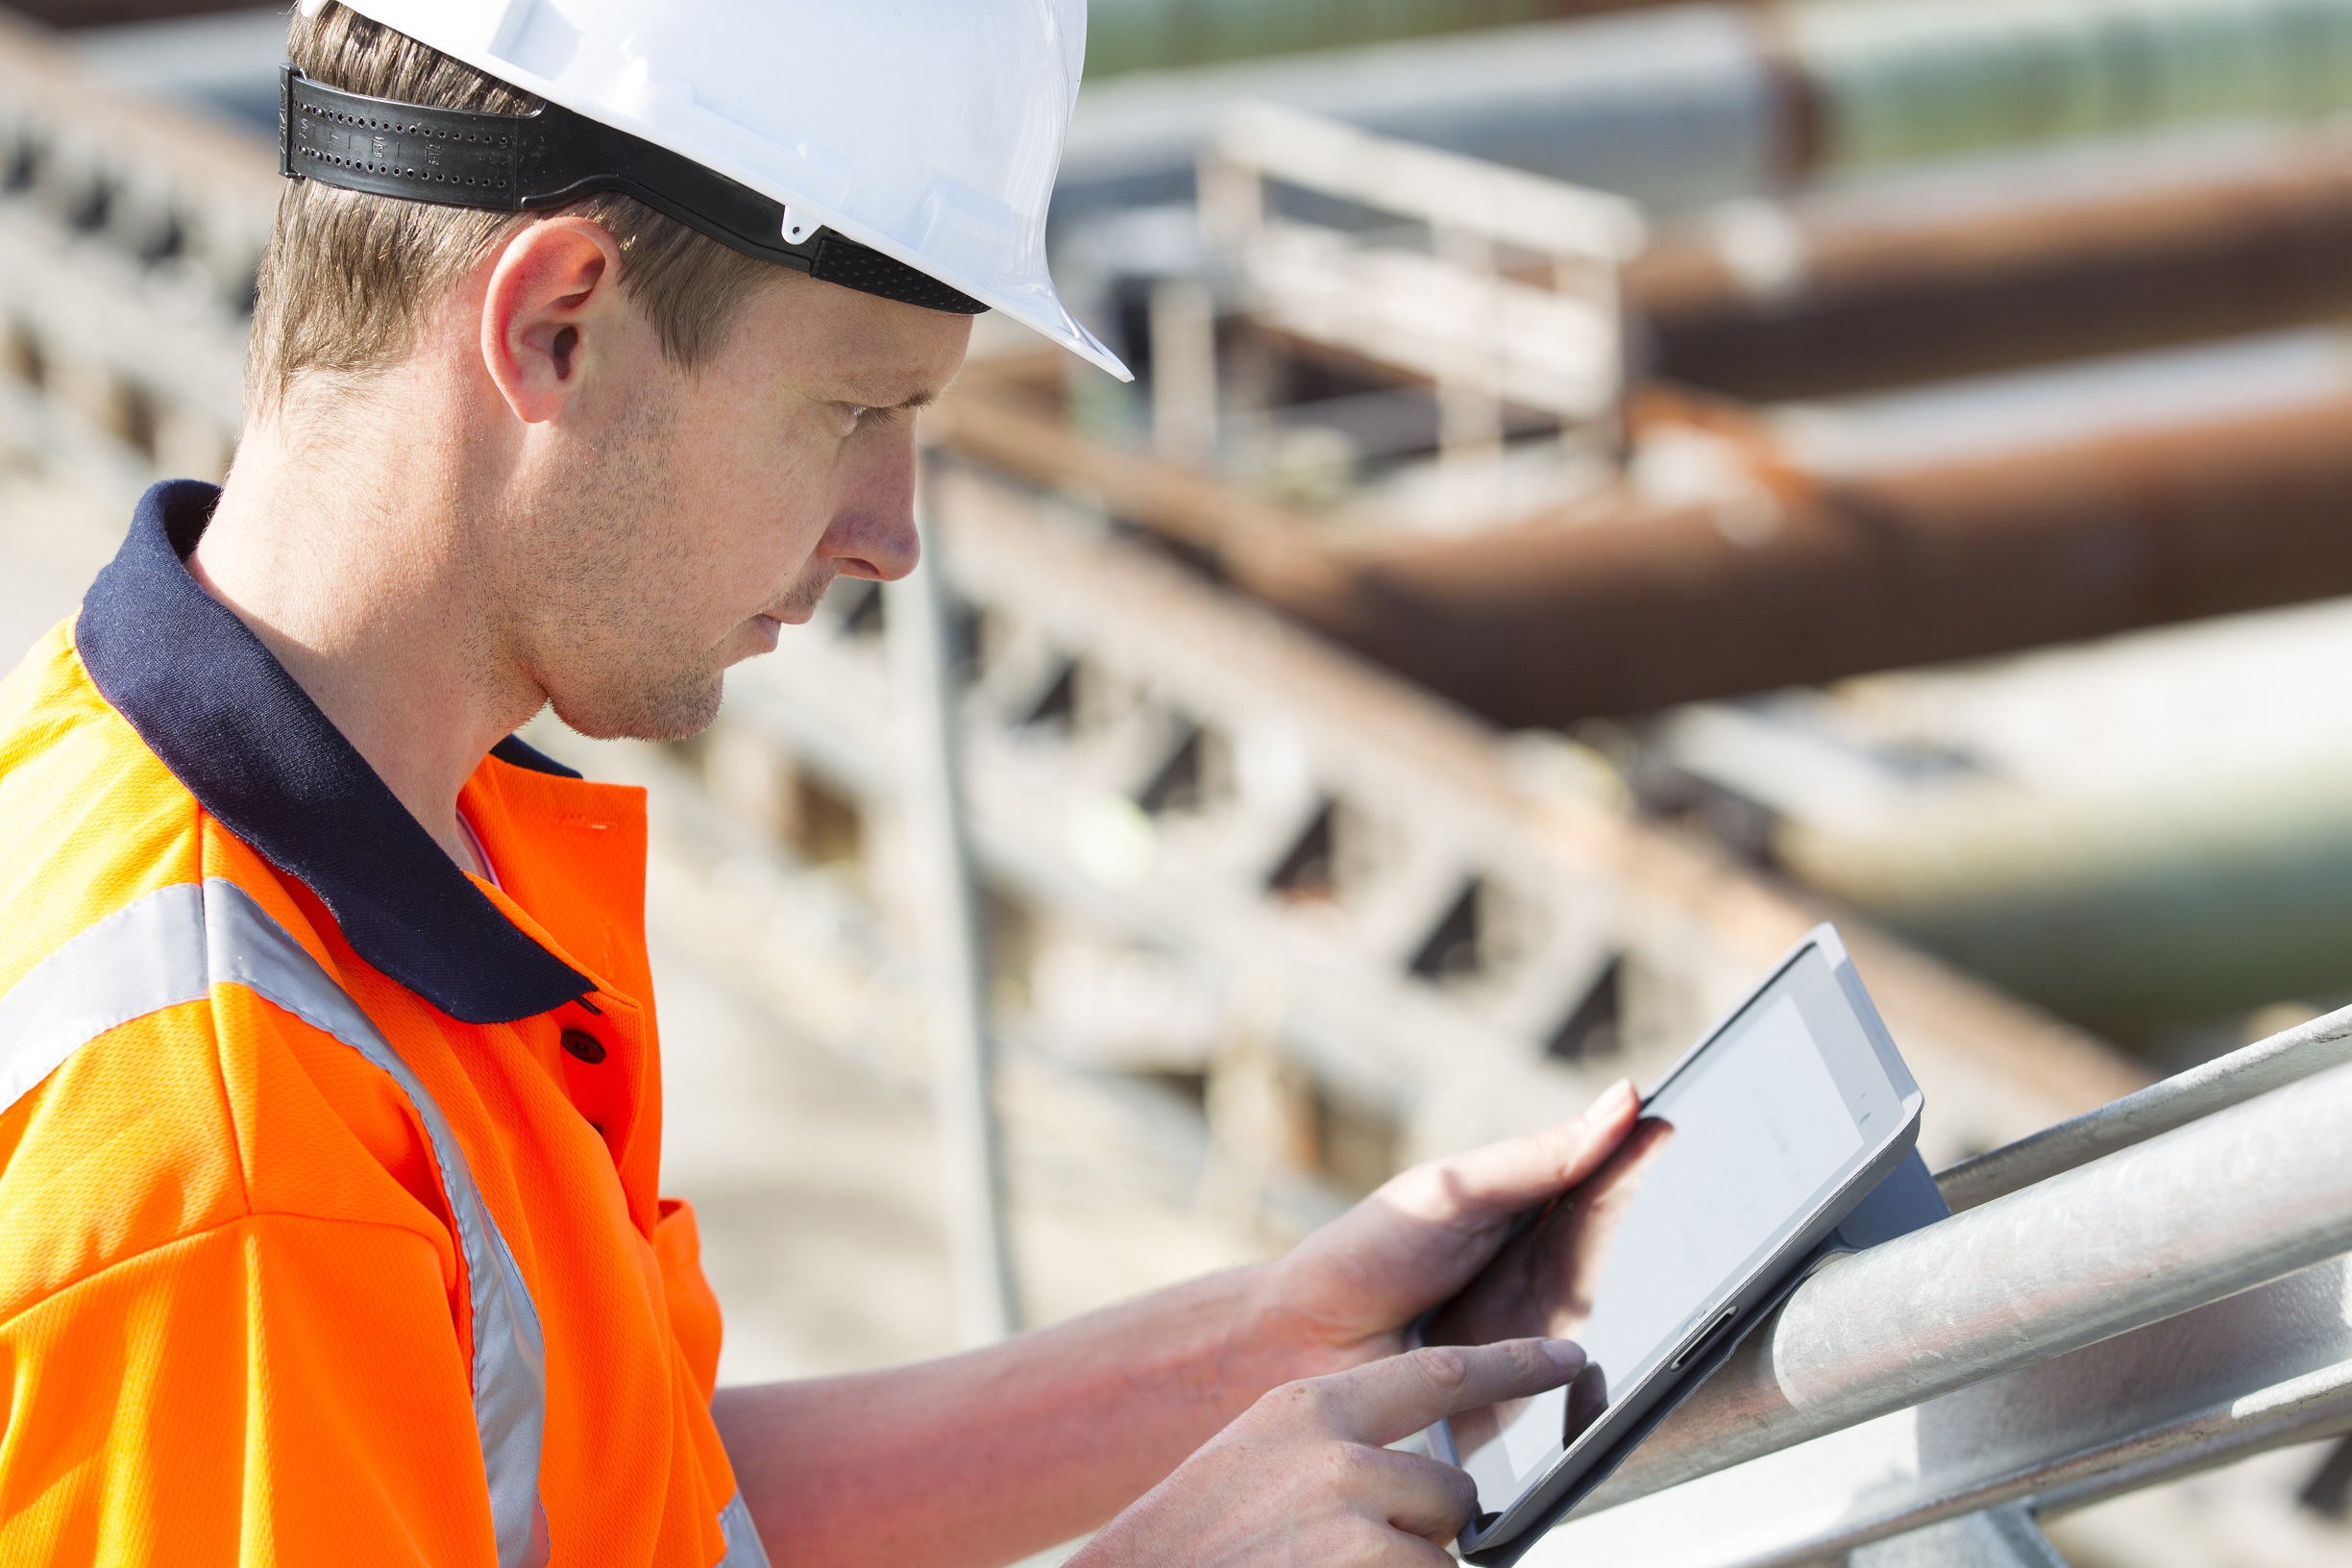 Improve Workplace Safety using Technology, Mobile Safety Inspection Apps, Incident Reporting